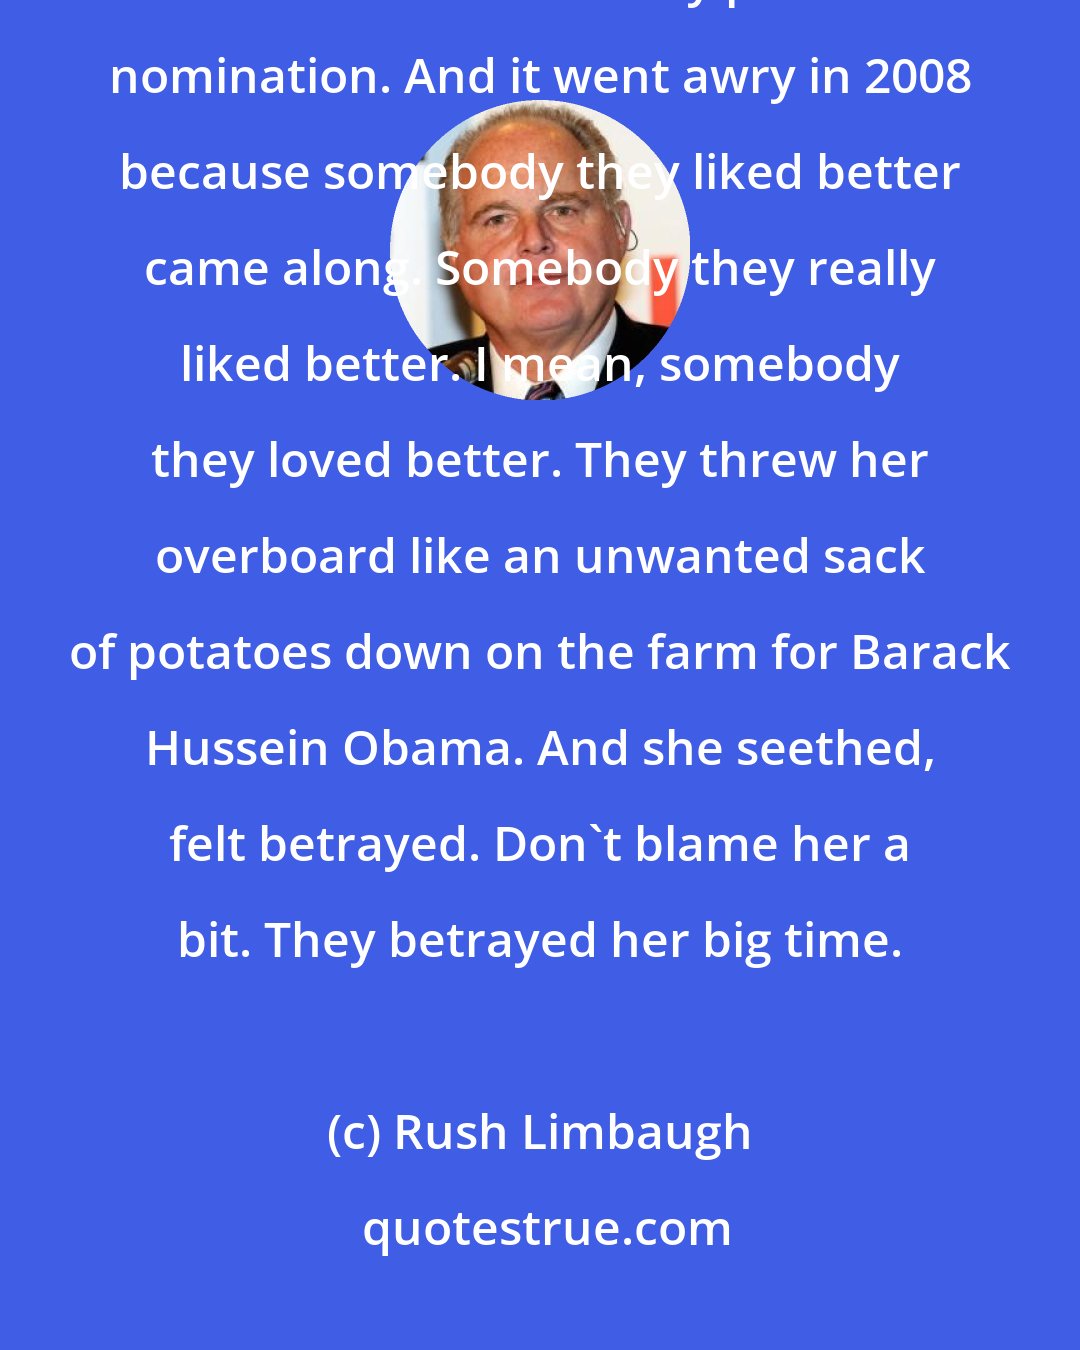 Rush Limbaugh: It was all for the eventual payoff and thank-you by giving Hillary Clinton the Democrat Party presidential nomination. And it went awry in 2008 because somebody they liked better came along. Somebody they really liked better. I mean, somebody they loved better. They threw her overboard like an unwanted sack of potatoes down on the farm for Barack Hussein Obama. And she seethed, felt betrayed. Don't blame her a bit. They betrayed her big time.